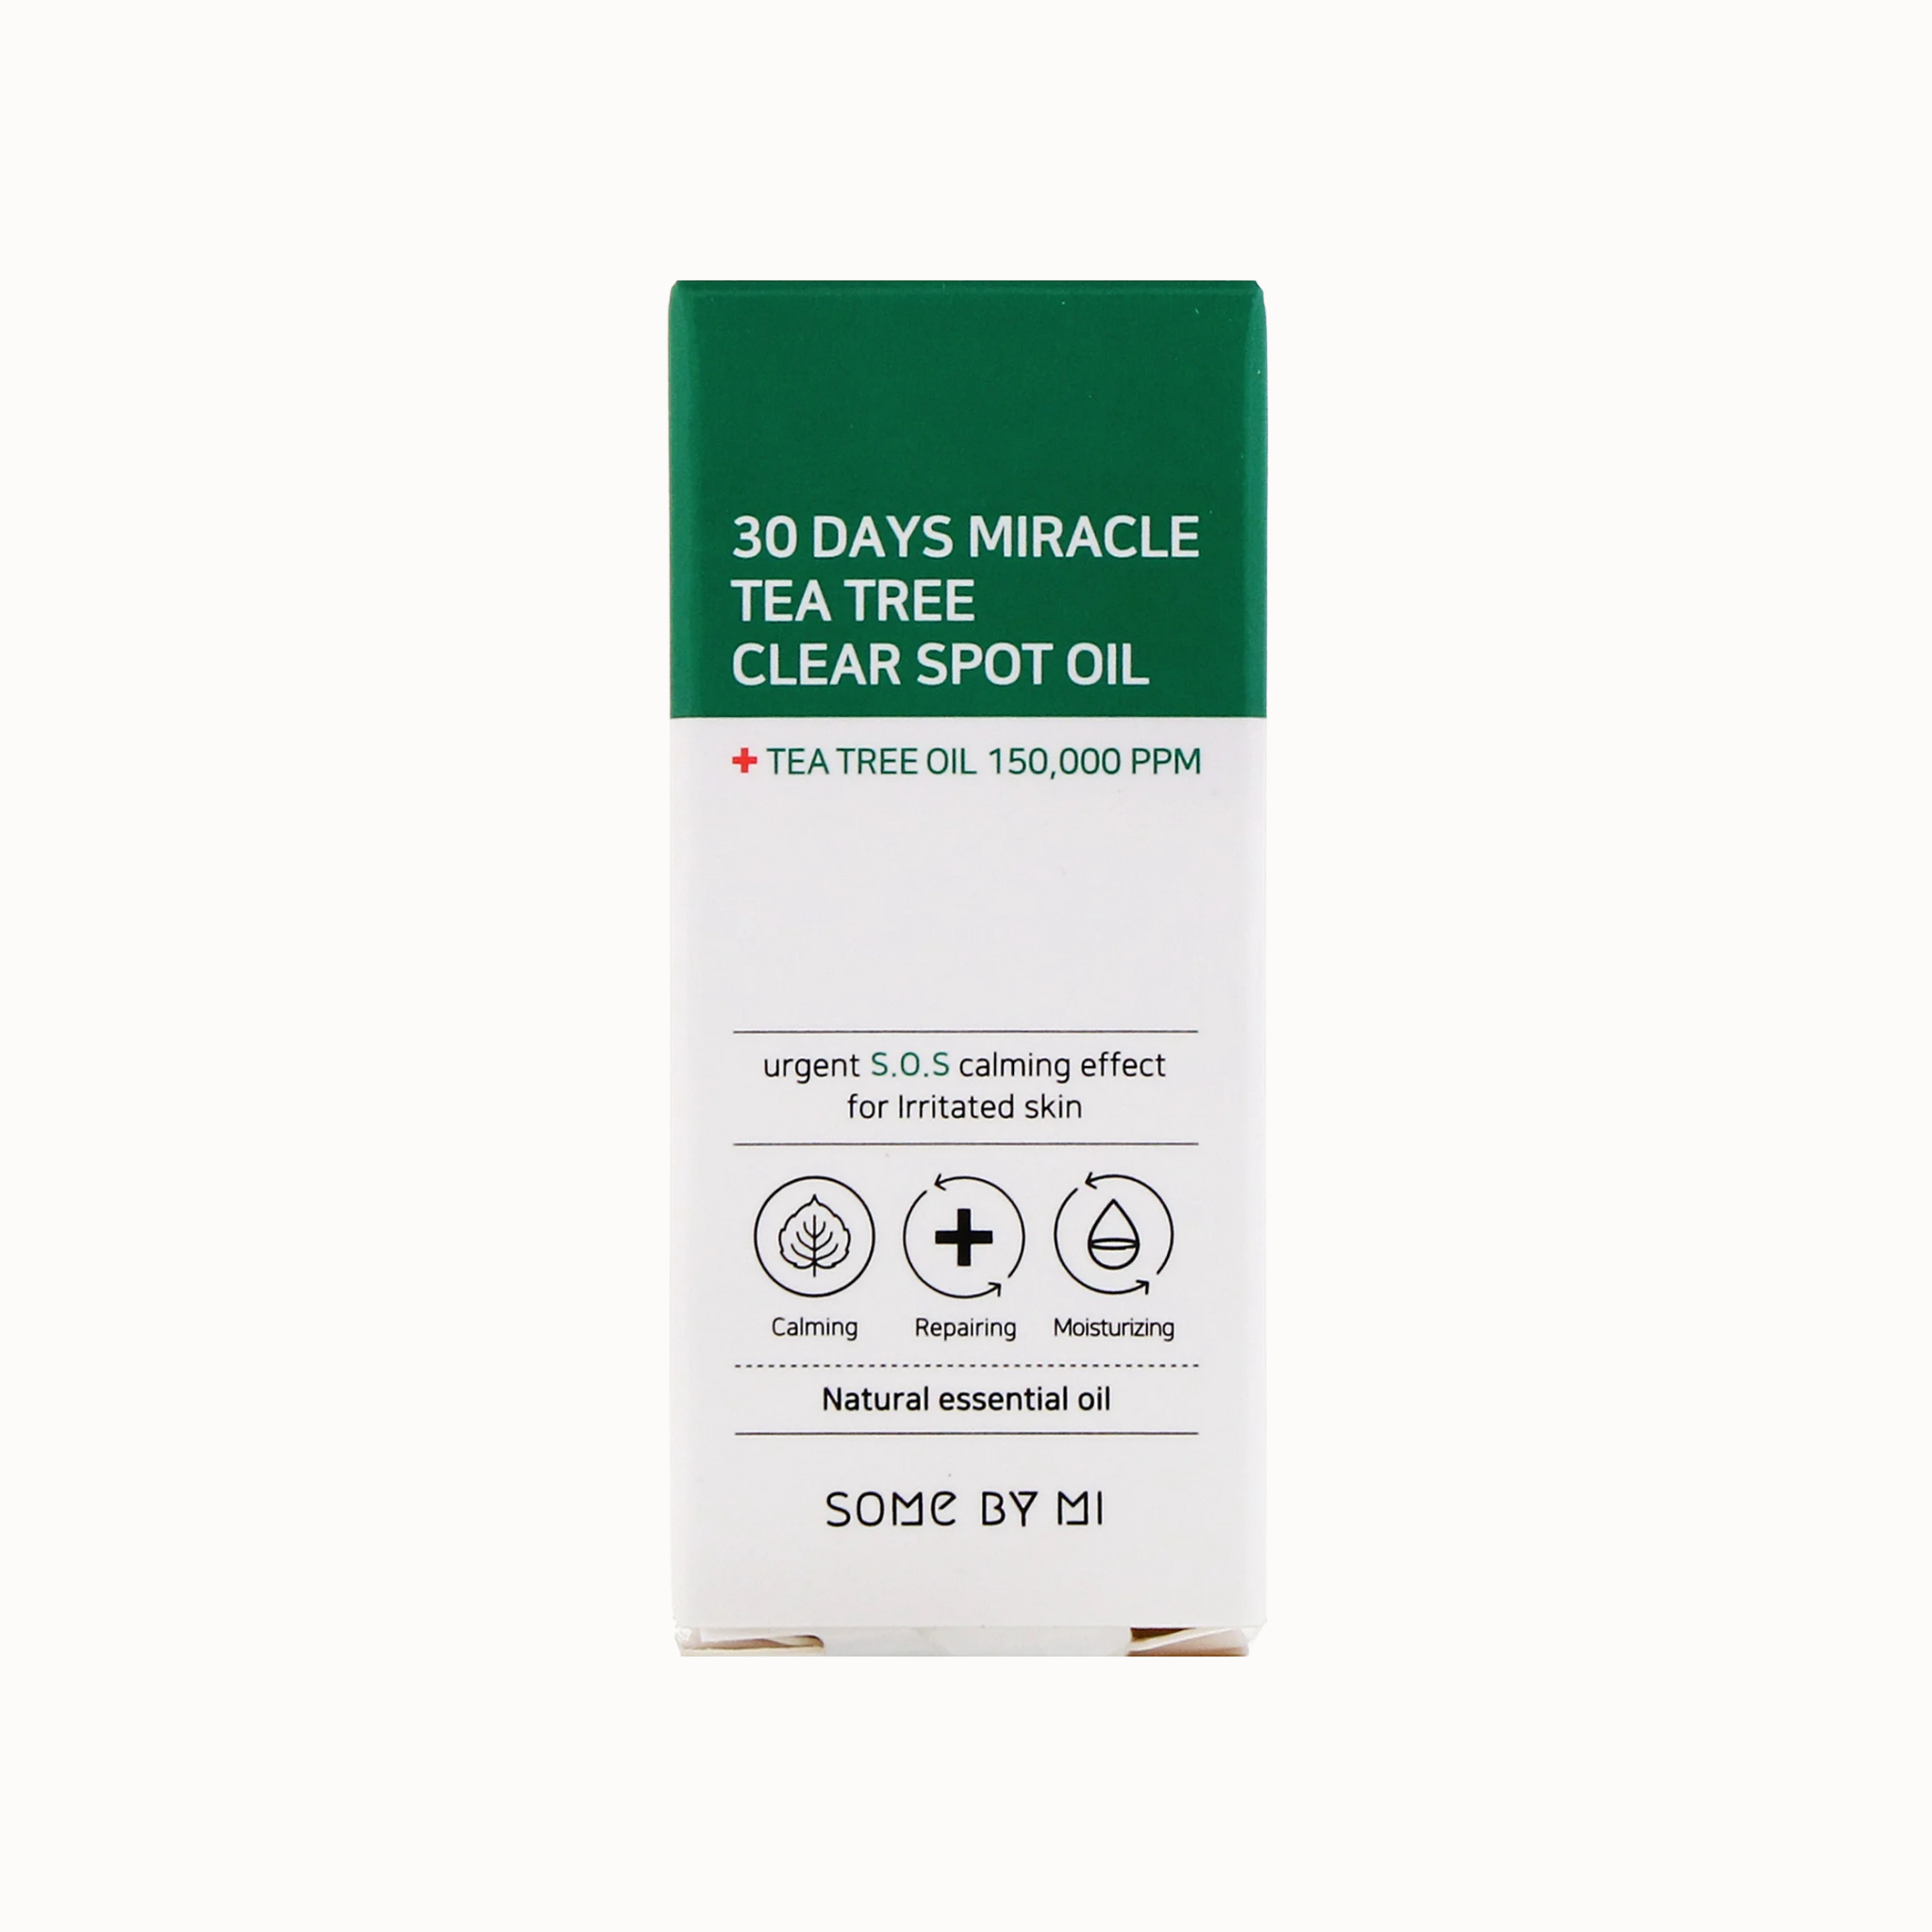 30 DAYS MIRACLE TEA TREE CLEAR SPOT OIL